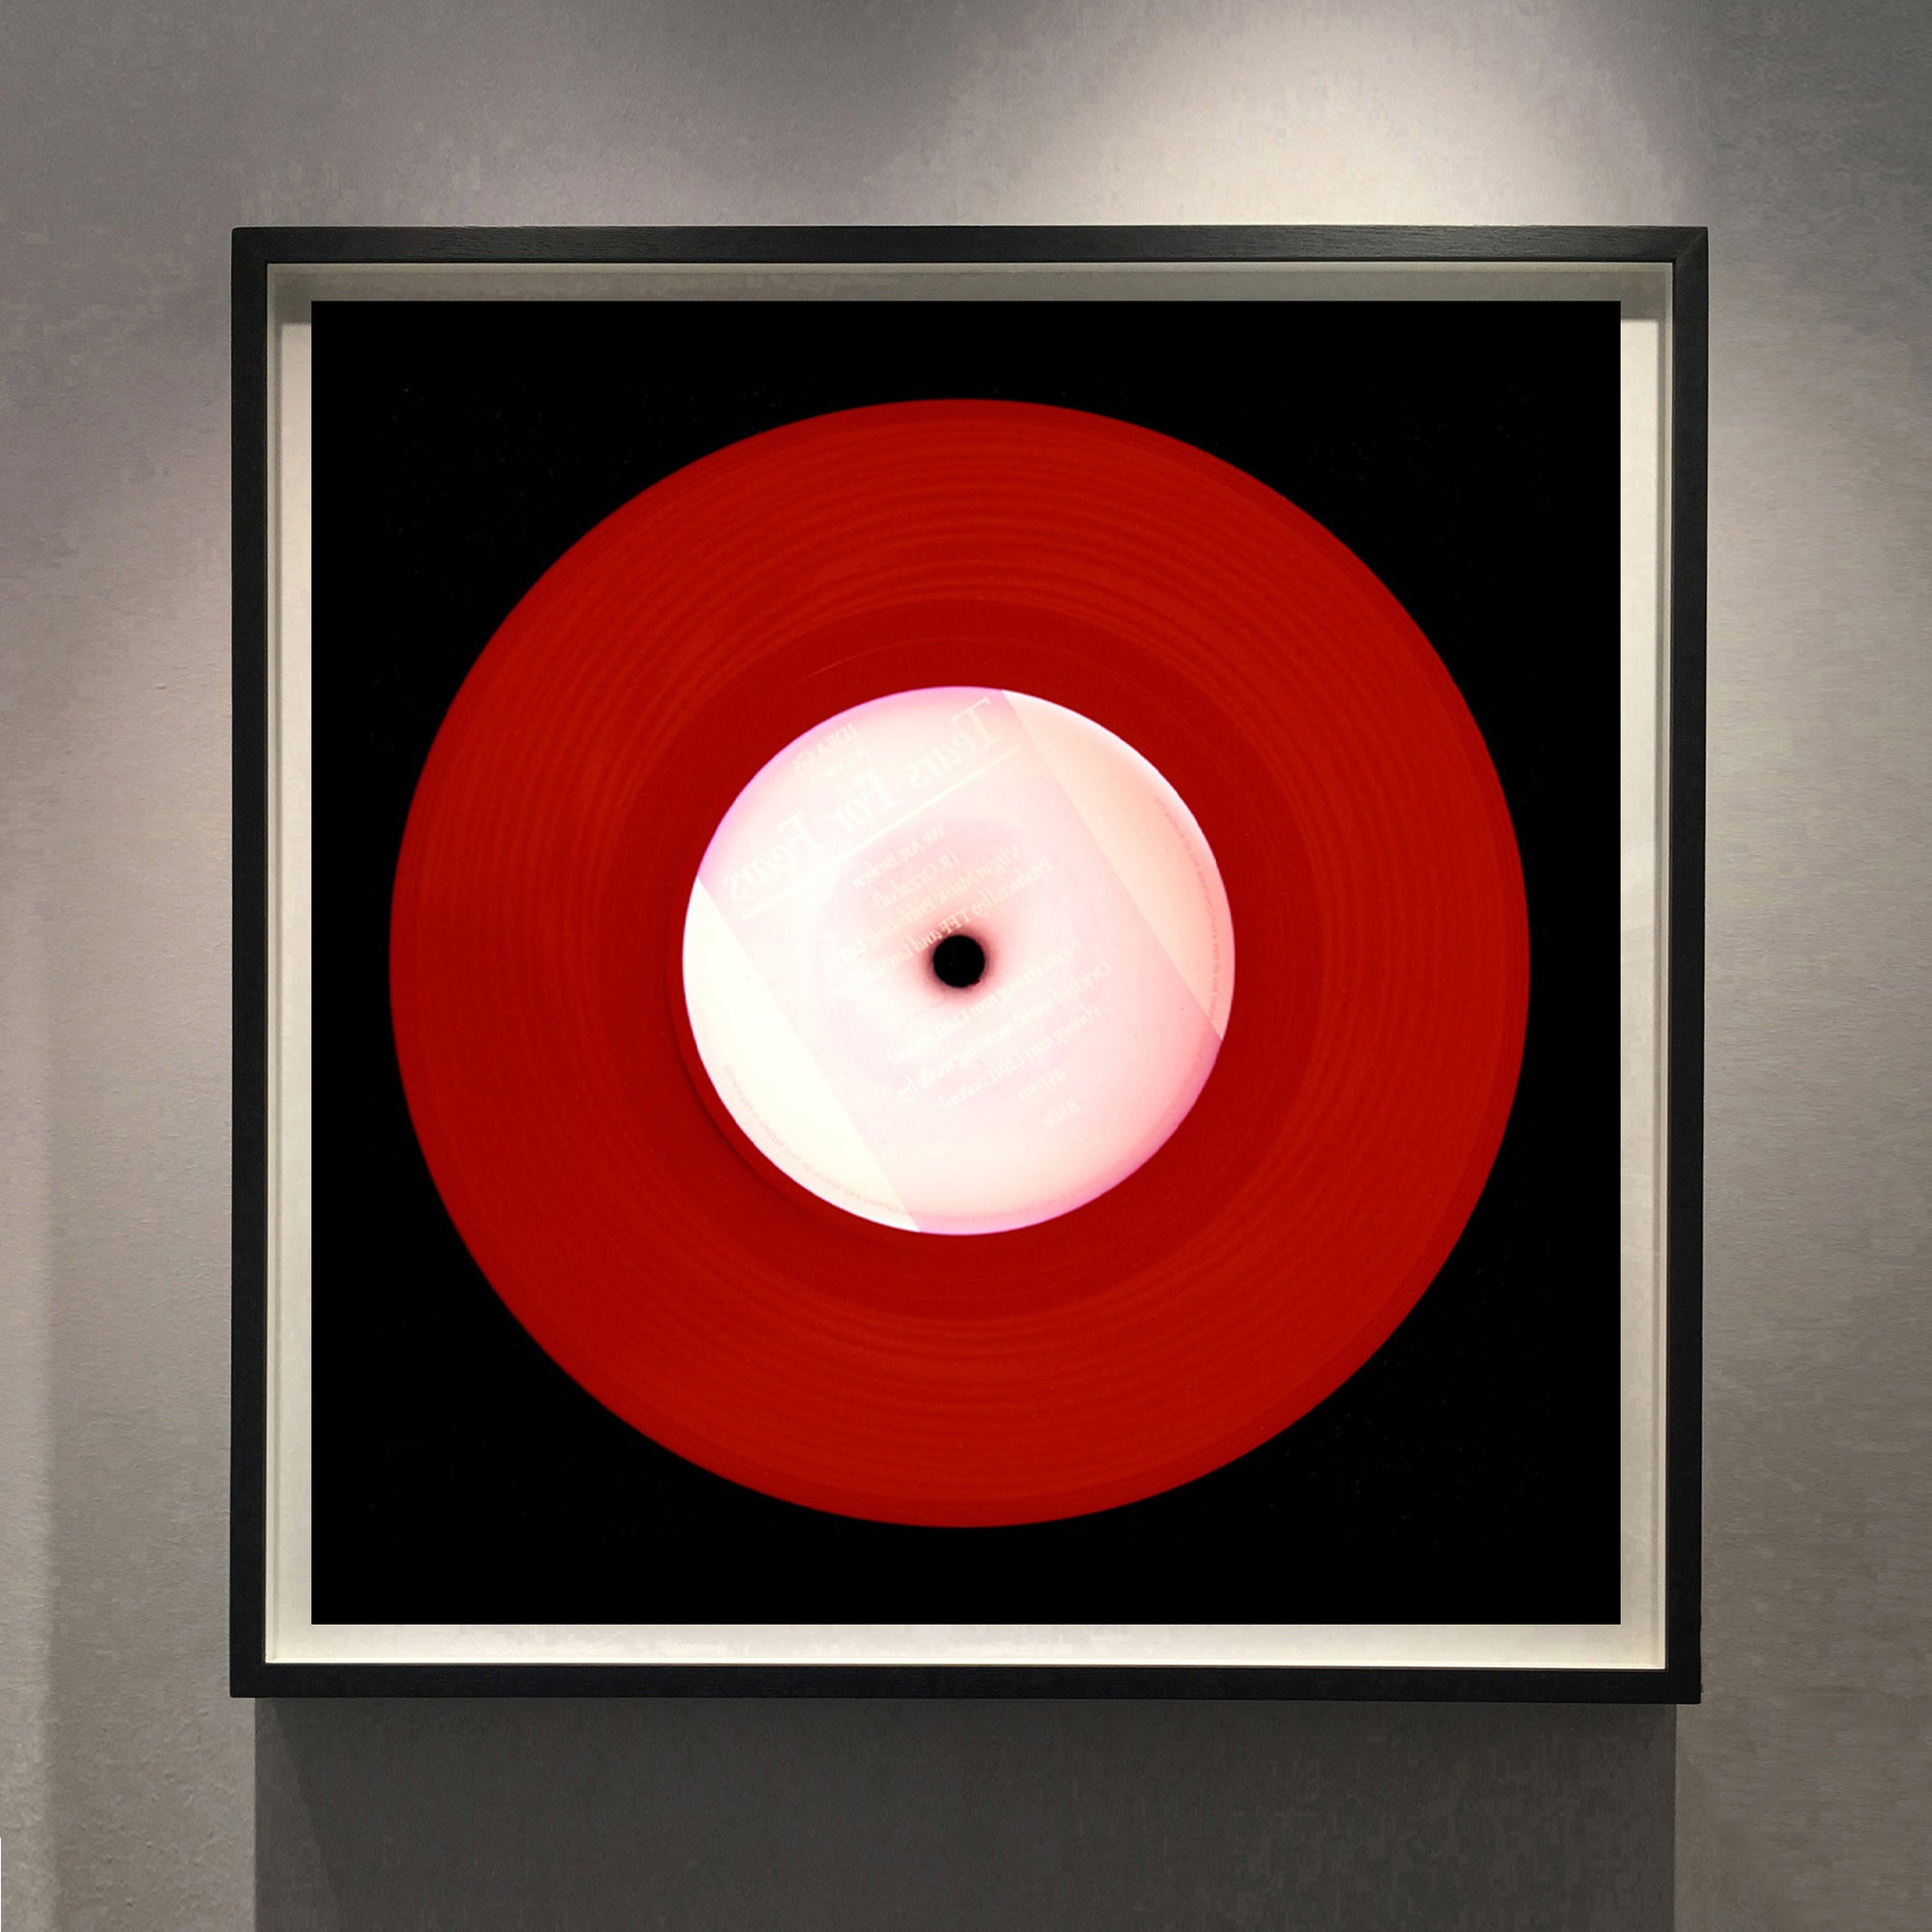 Vinyl Collection 'Idea' (Rose), 2015. Acclaimed contemporary photographers, Richard Heeps and Natasha Heidler have collaborated to make this beautifully mesmerising collection. A celebration of the vinyl record and analogue technology, which reflects the artists practice within photography. 